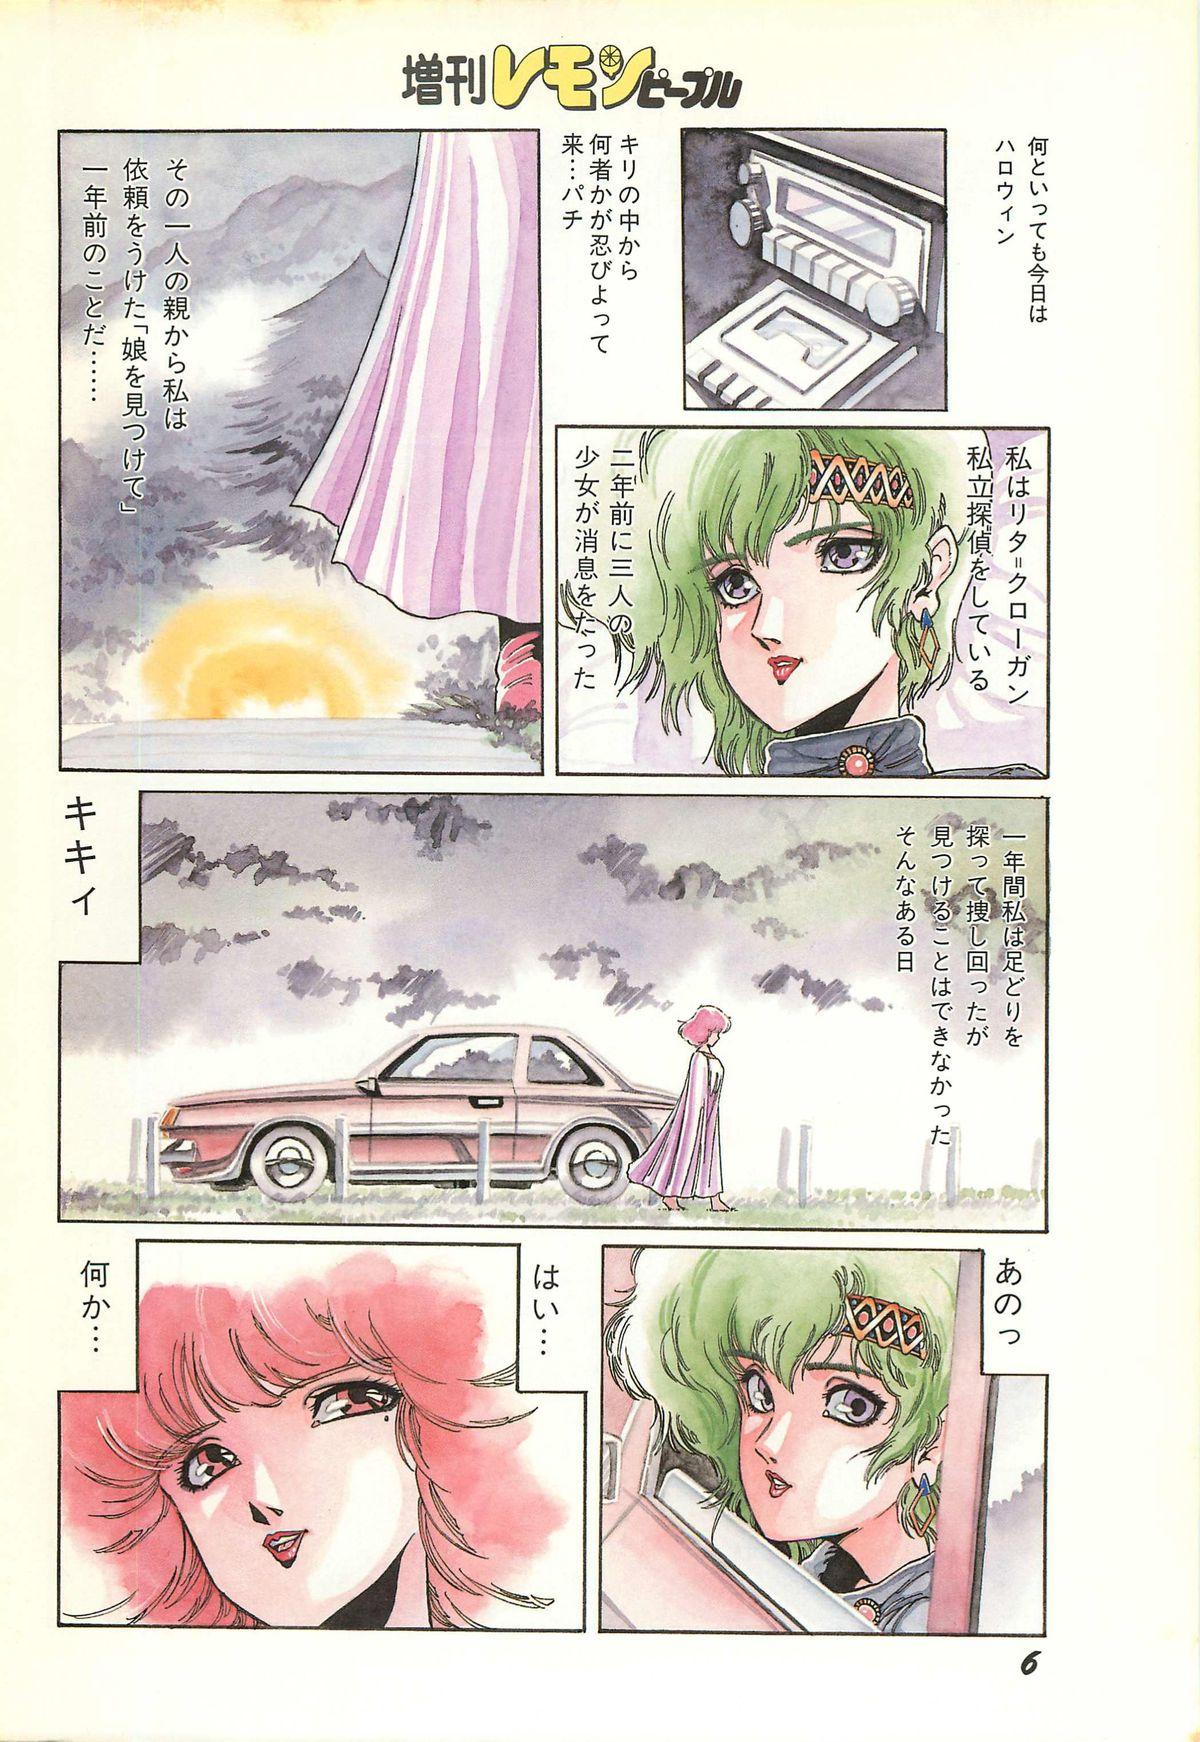 Tight Pussy Lemon People 1986-11 Zoukangou Vol. 65 All Color Gloryholes - Page 8